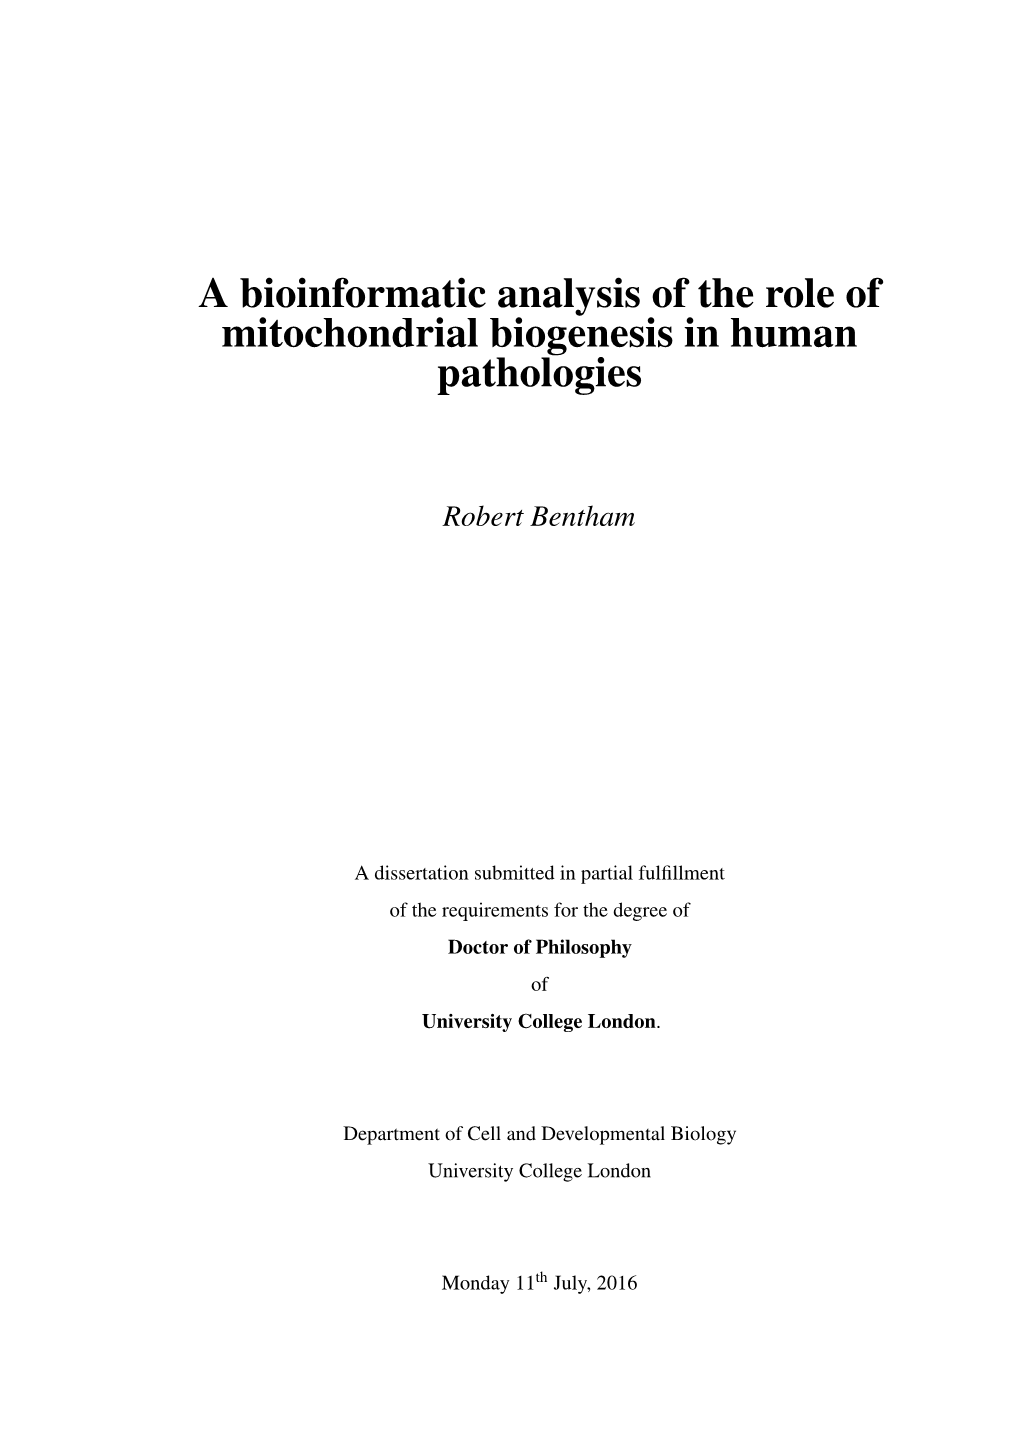 A Bioinformatic Analysis of the Role of Mitochondrial Biogenesis in Human Pathologies